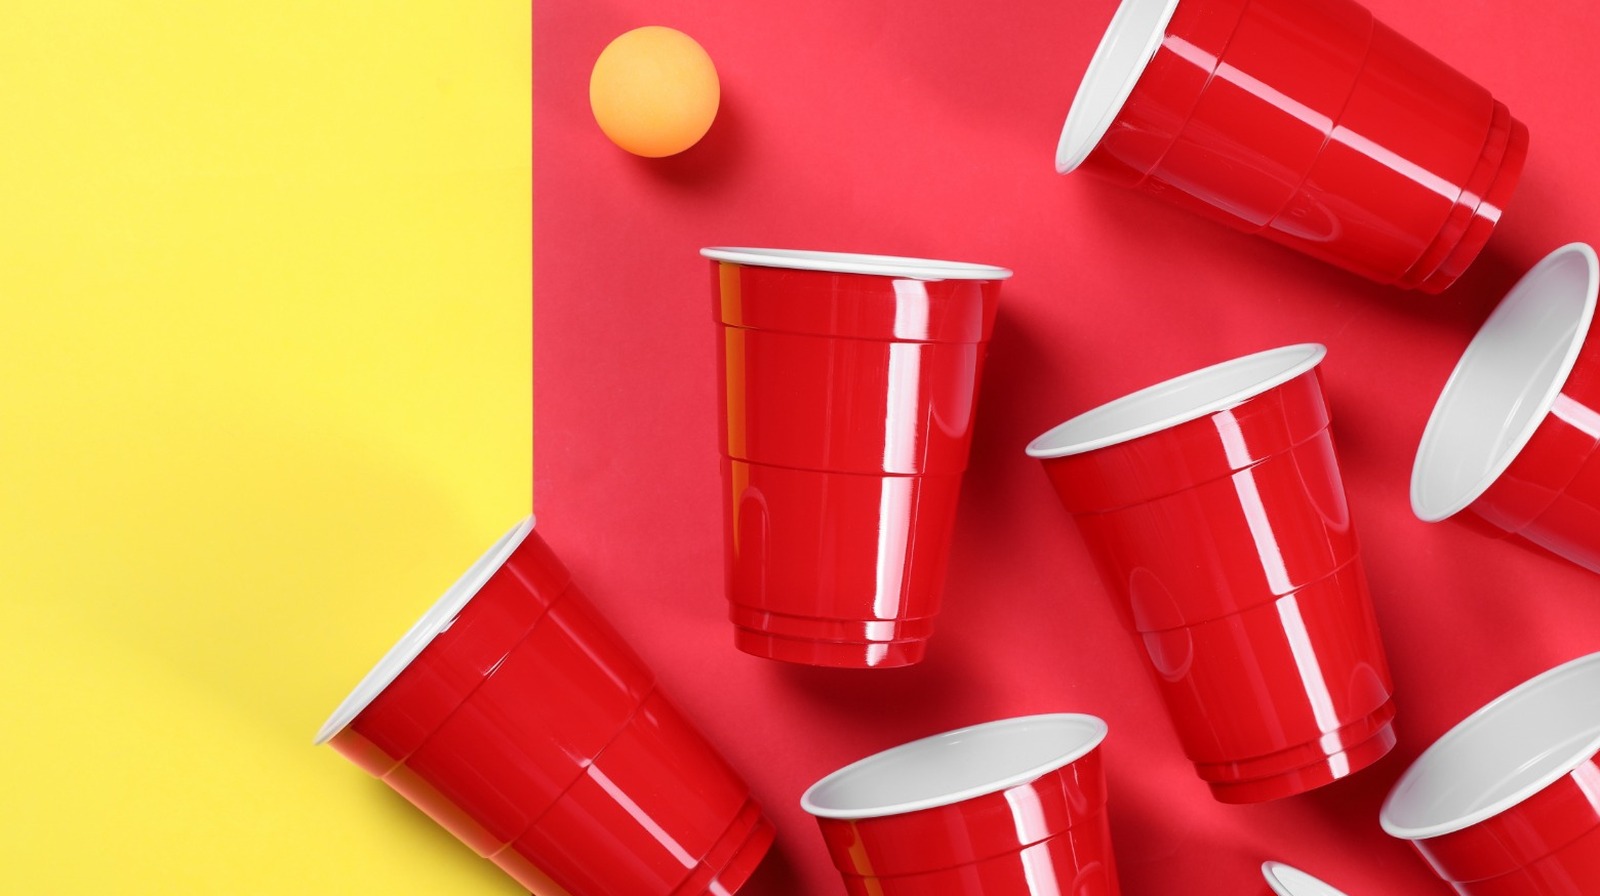 https://www.foodrepublic.com/img/gallery/do-the-lines-on-red-solo-cups-mean-anything/l-intro-1707490033.jpg